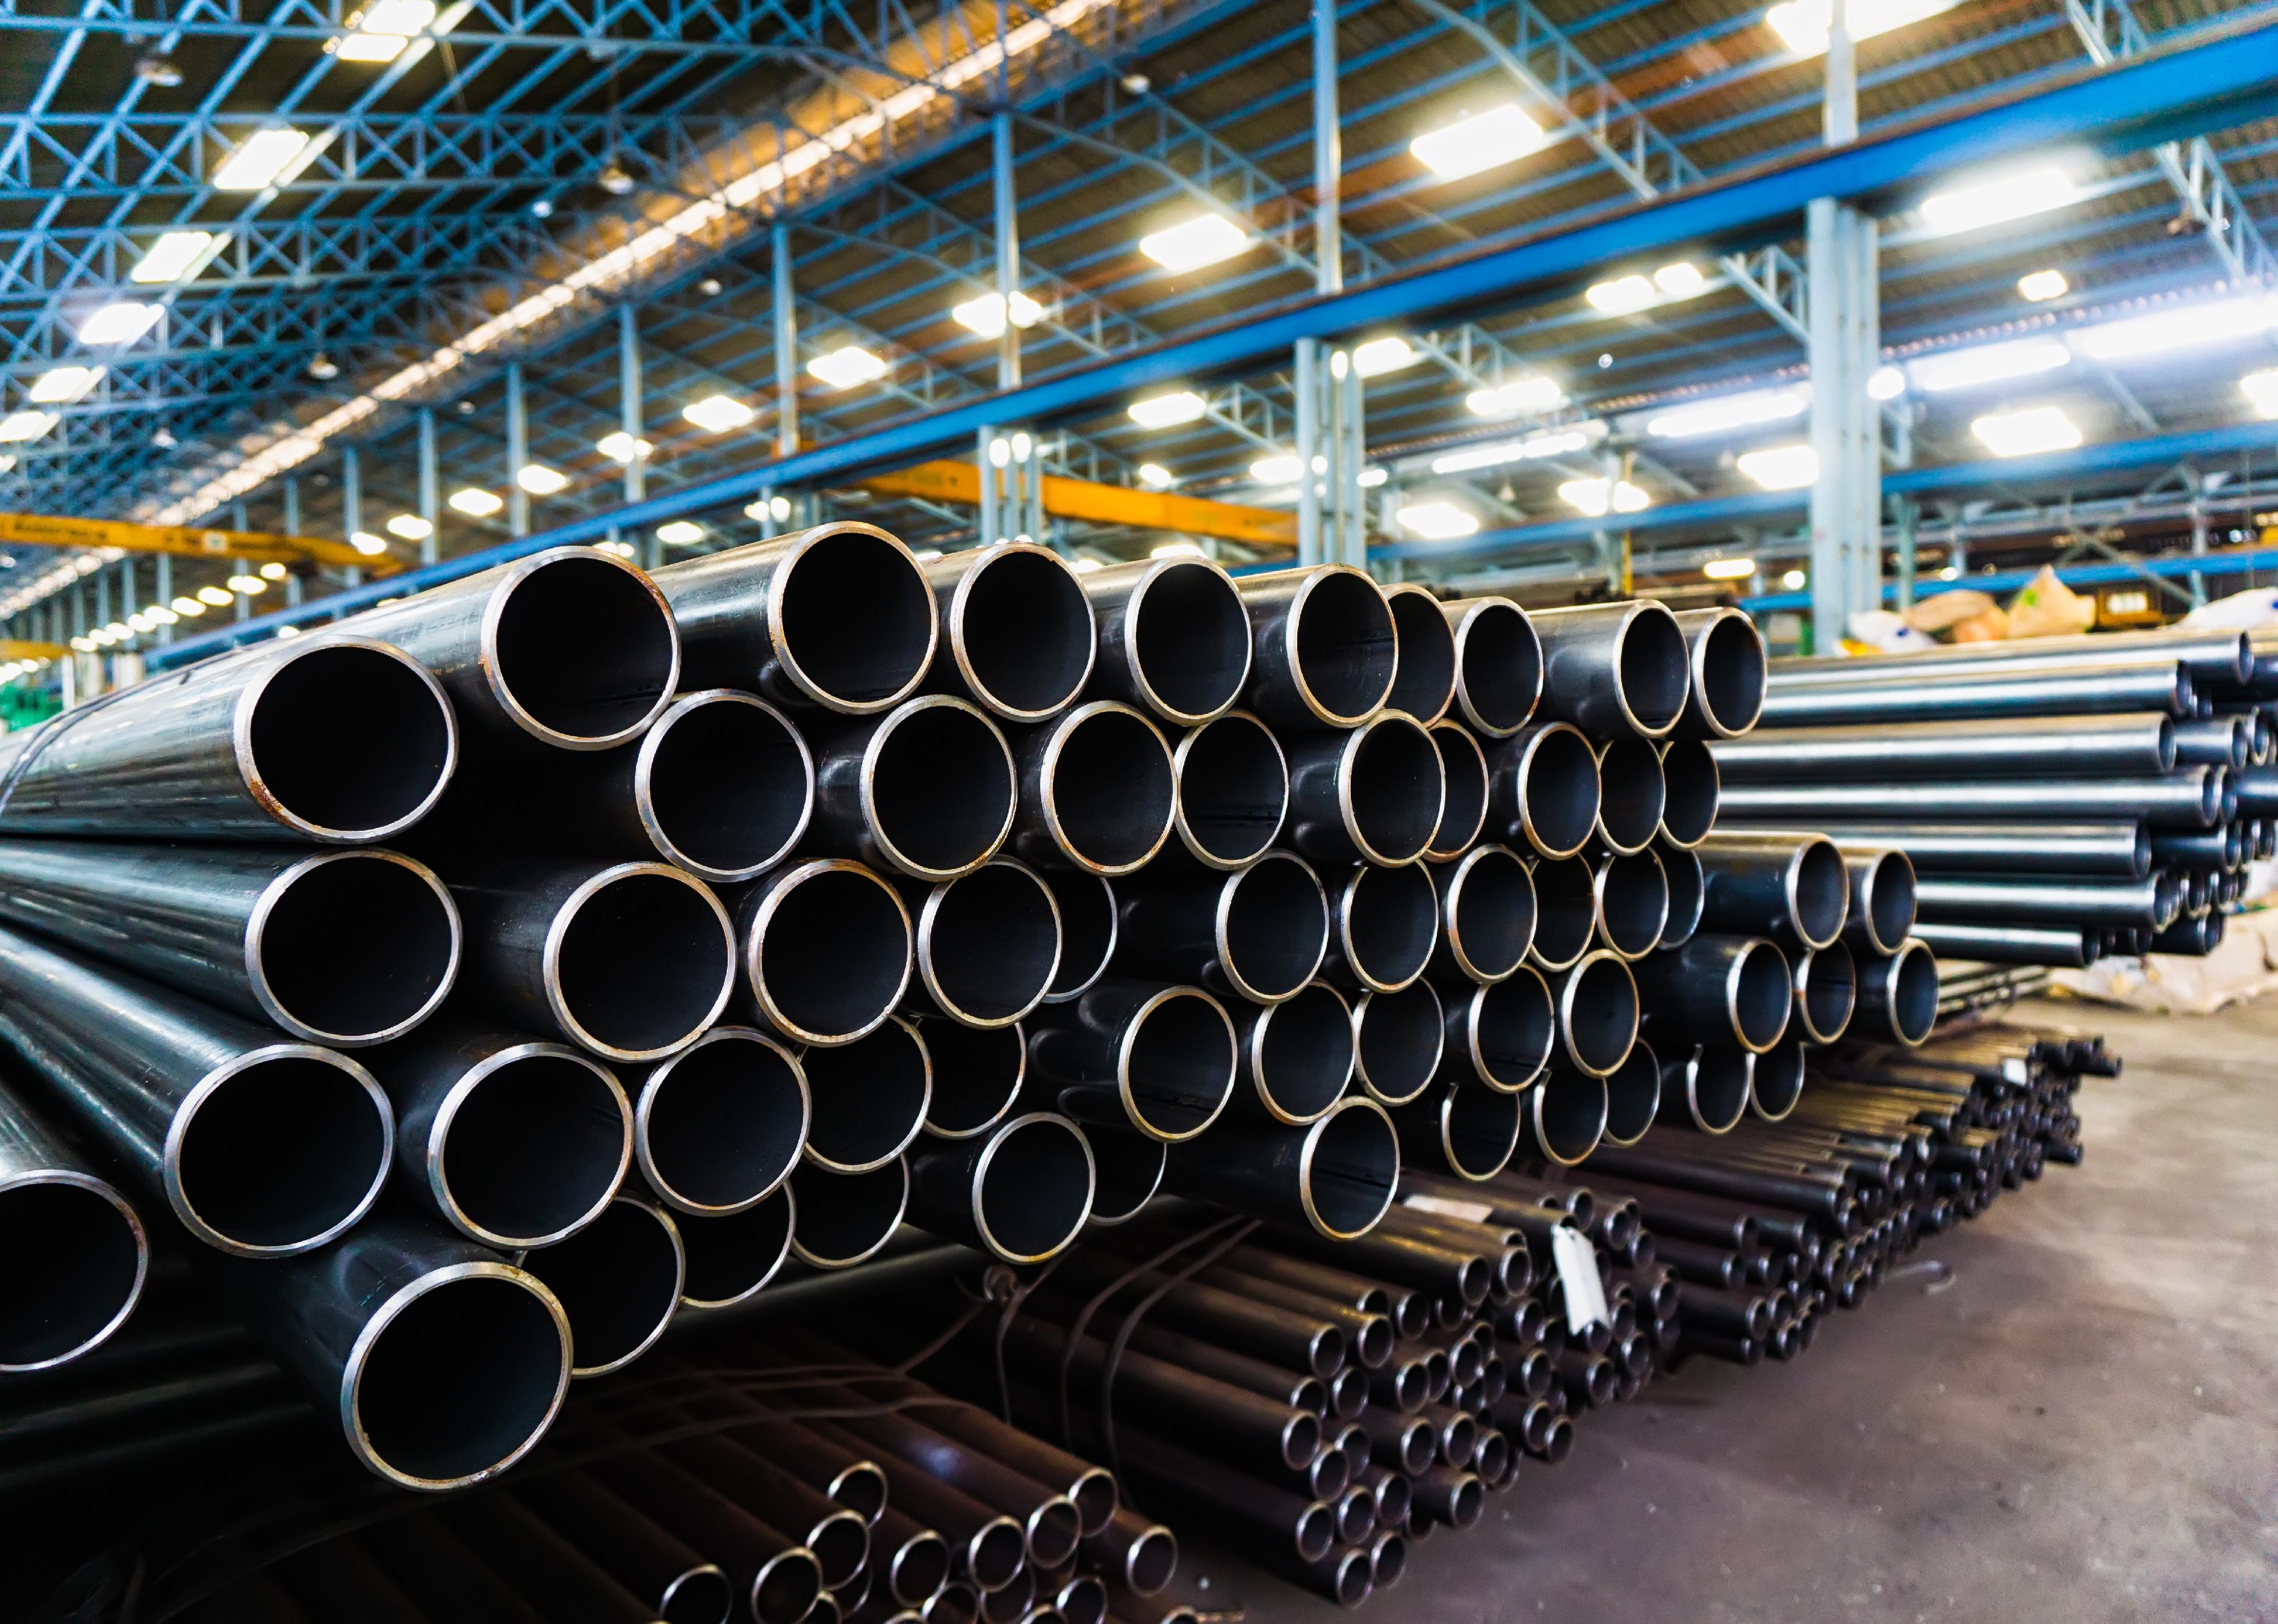 Steel pipe in a stack waiting for shipment.